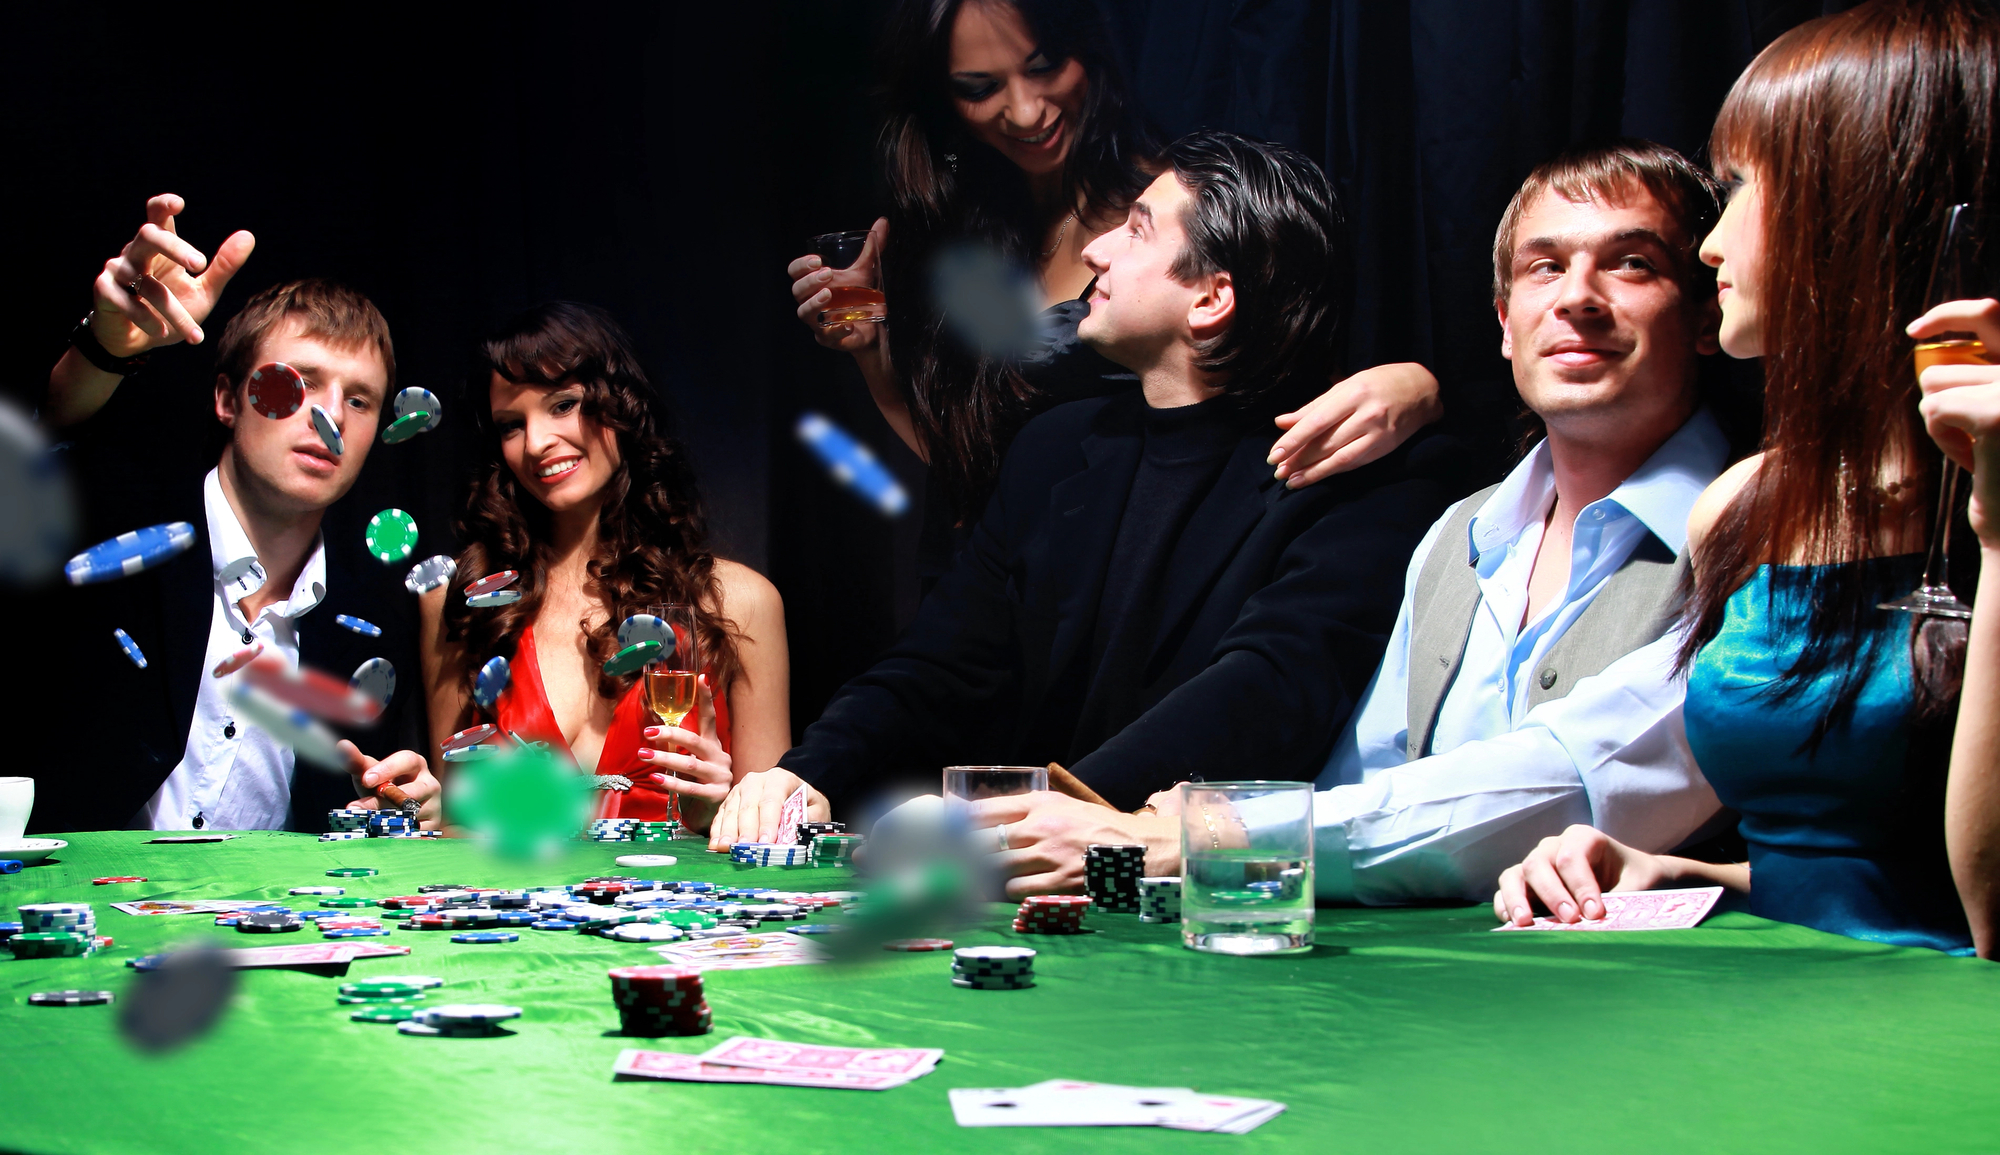 How to Host a Poker Night the Right Way